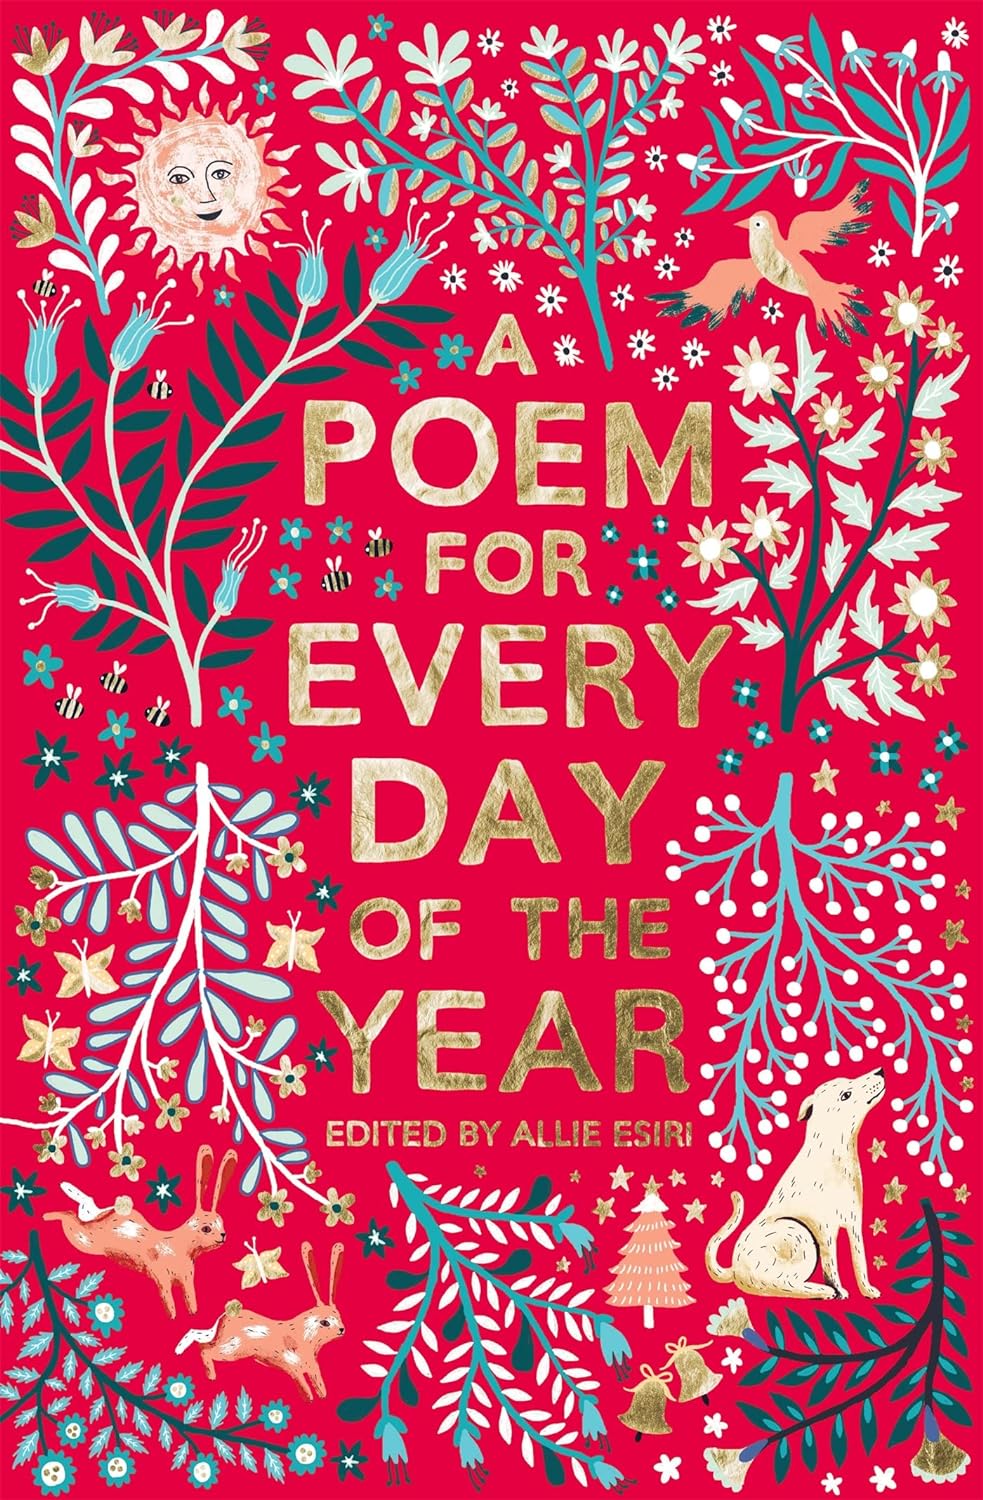 Allie Esiri (edited by): A Poem for Every Day of the Year, illustrated by Papio Press